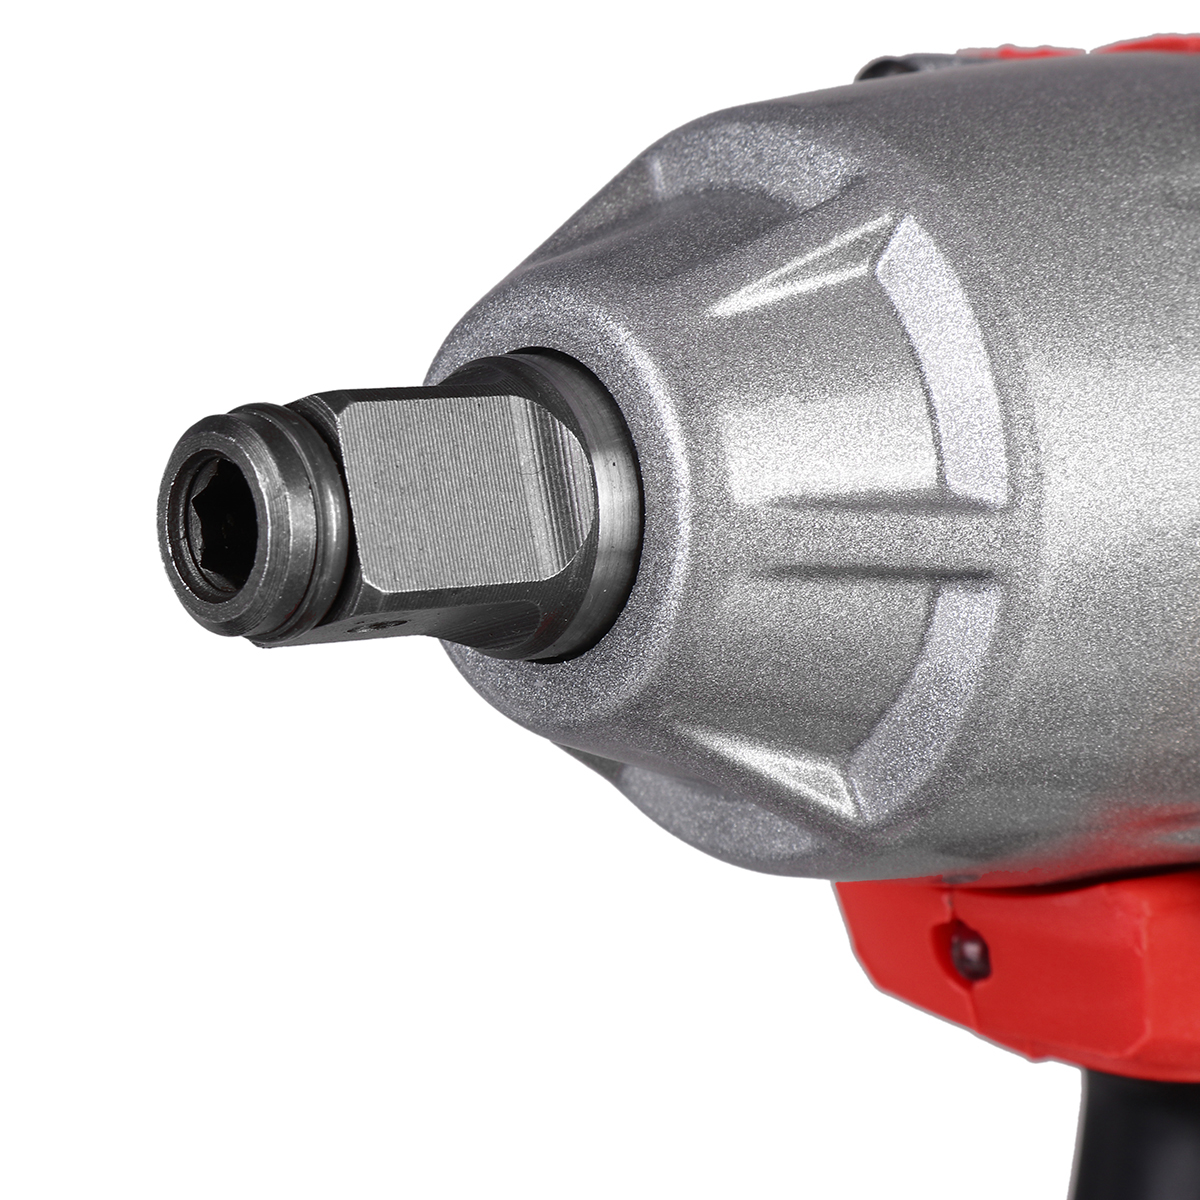 588Nm-388VF-Electric-Impact-Wrench-Driver-Rechargeable-12quot-Square-Power-Tools-w-None12-Battery-Al-1855254-10